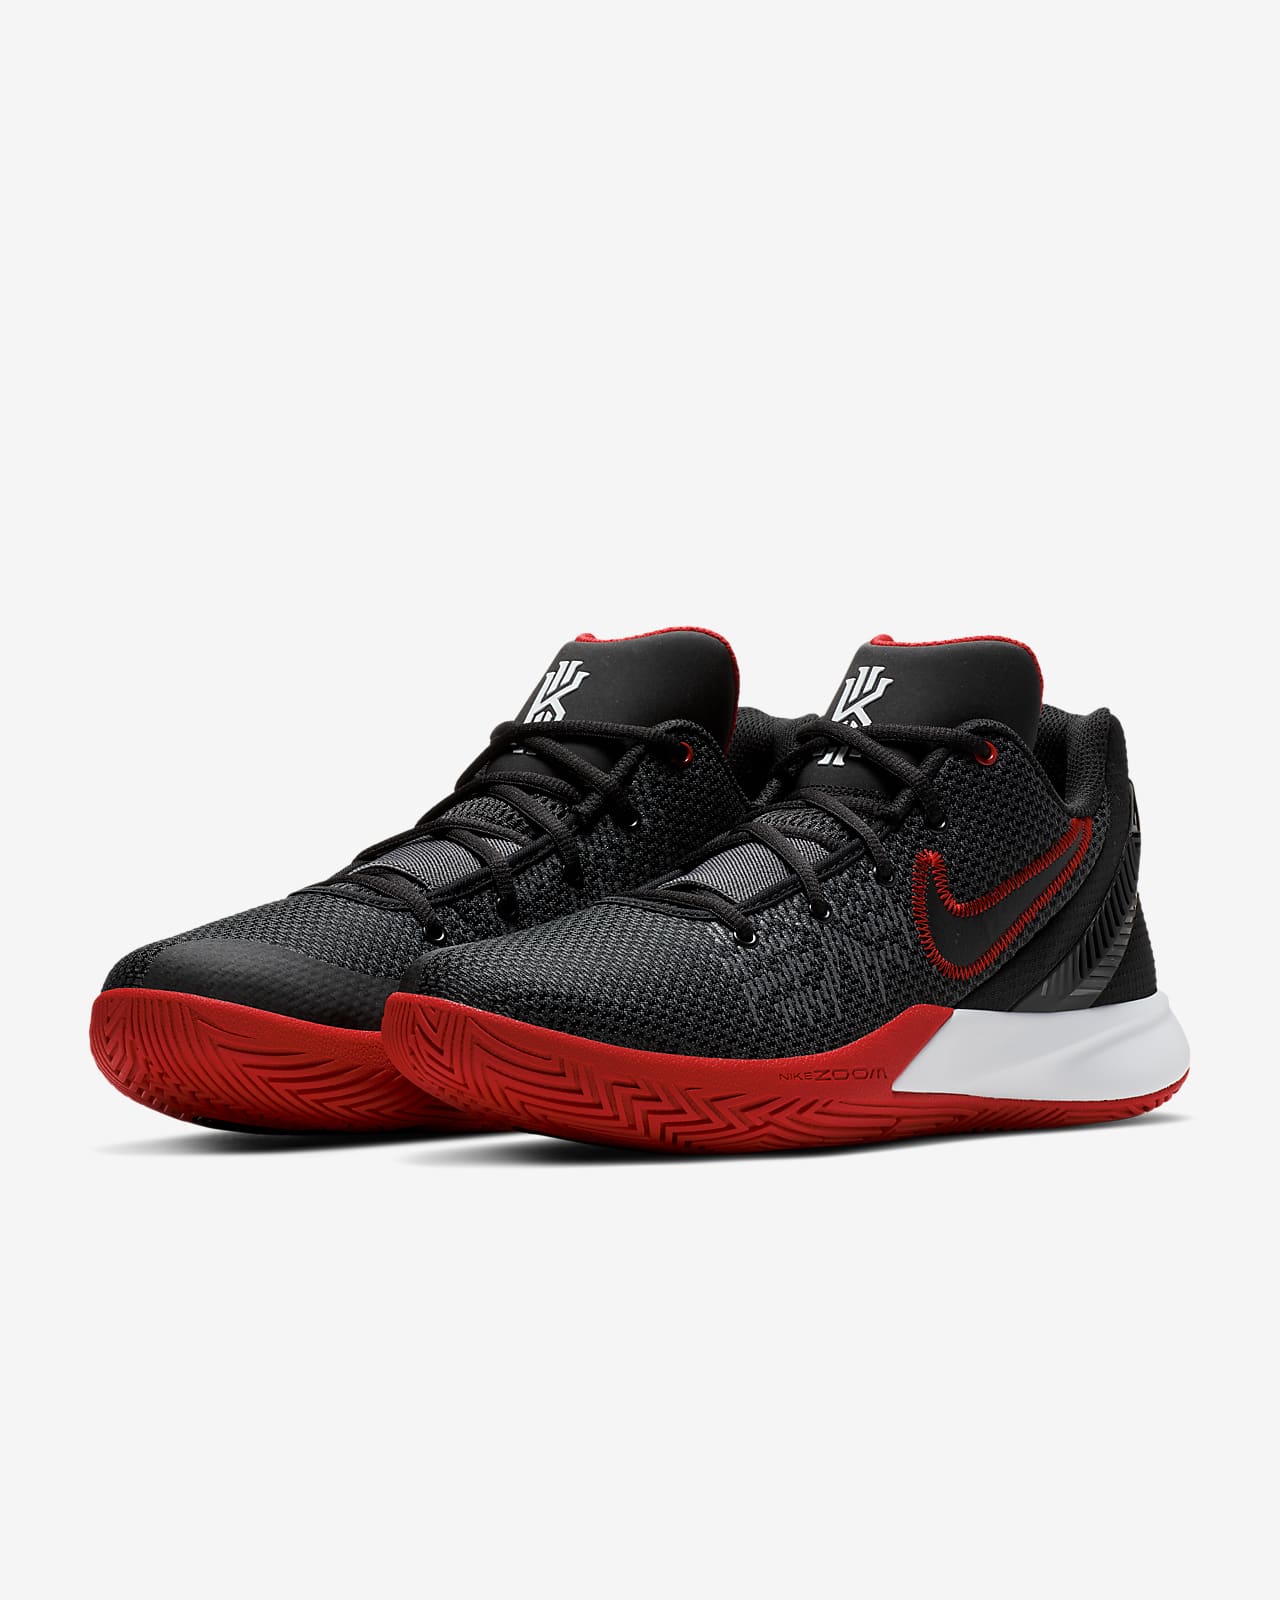 kyrie flytrap 2 red and black